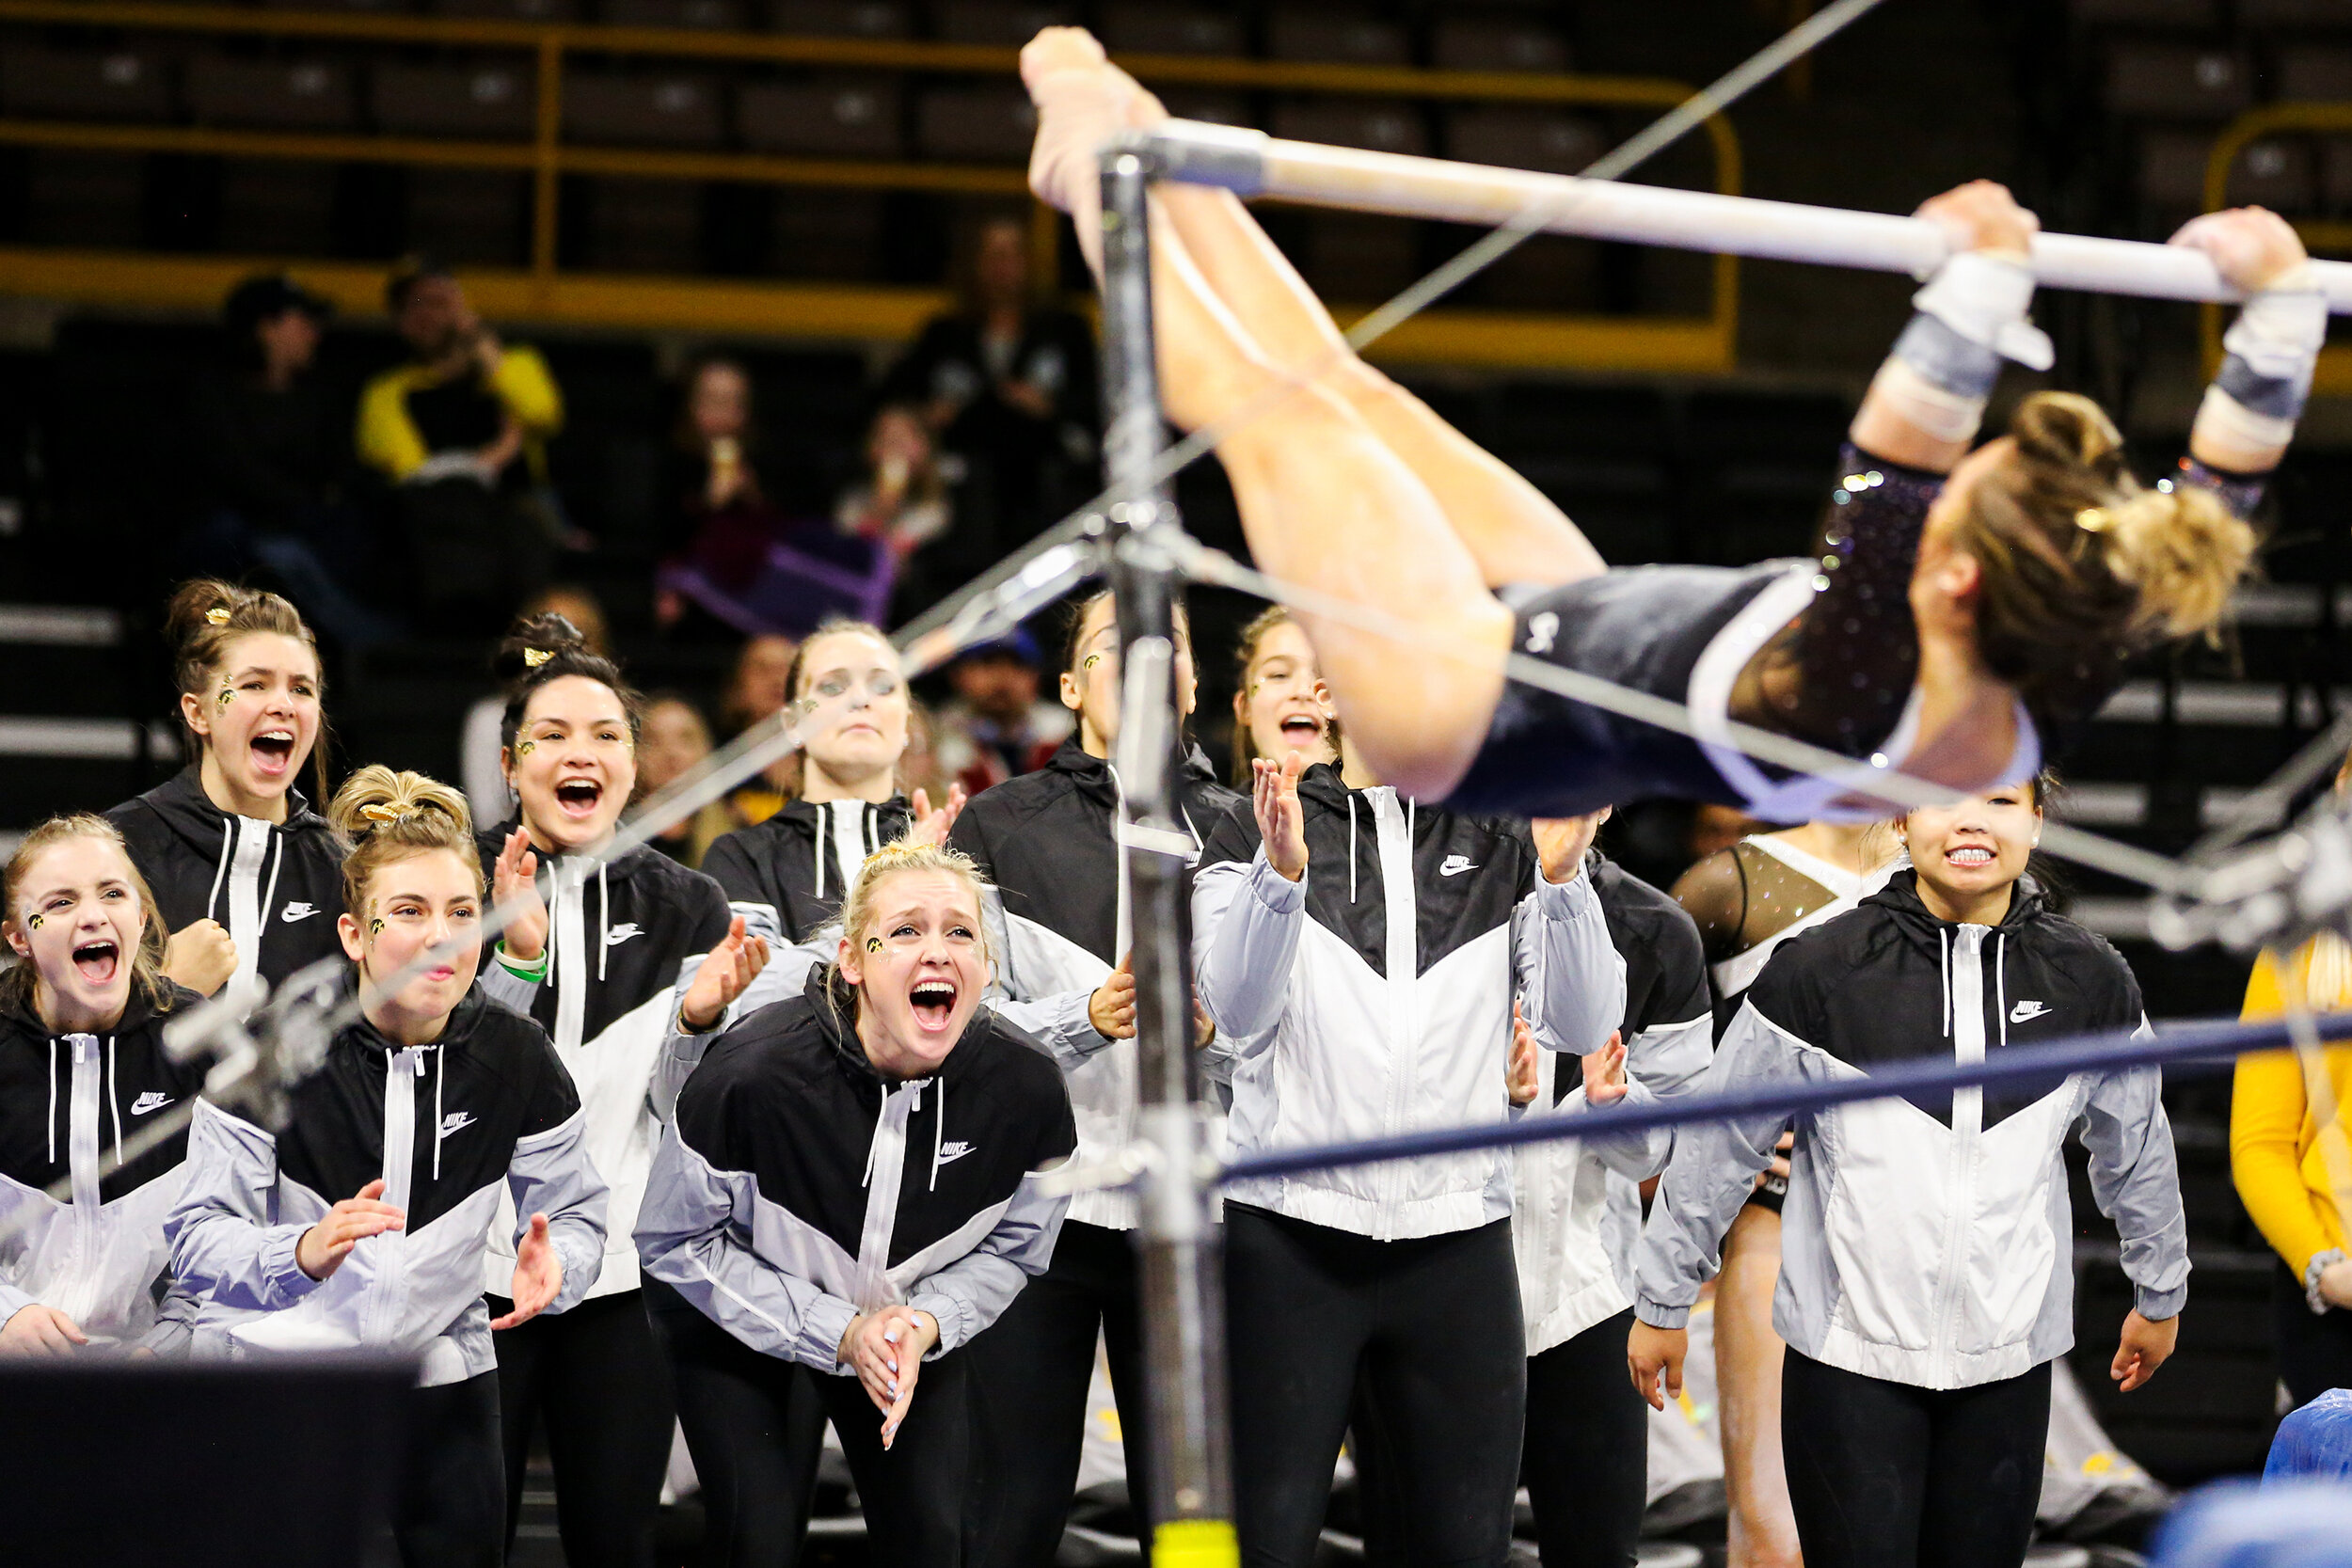  Members of the University of Iowa Women’s Gymnastics Team cheer on teammate Maggie Kampschroeder as she competes on the uneven bars during a gymnastics meet against Rutgers on Saturday, Jan. 26, 2019. The Hawkeyes defeated the Scarlet Knights 194.57